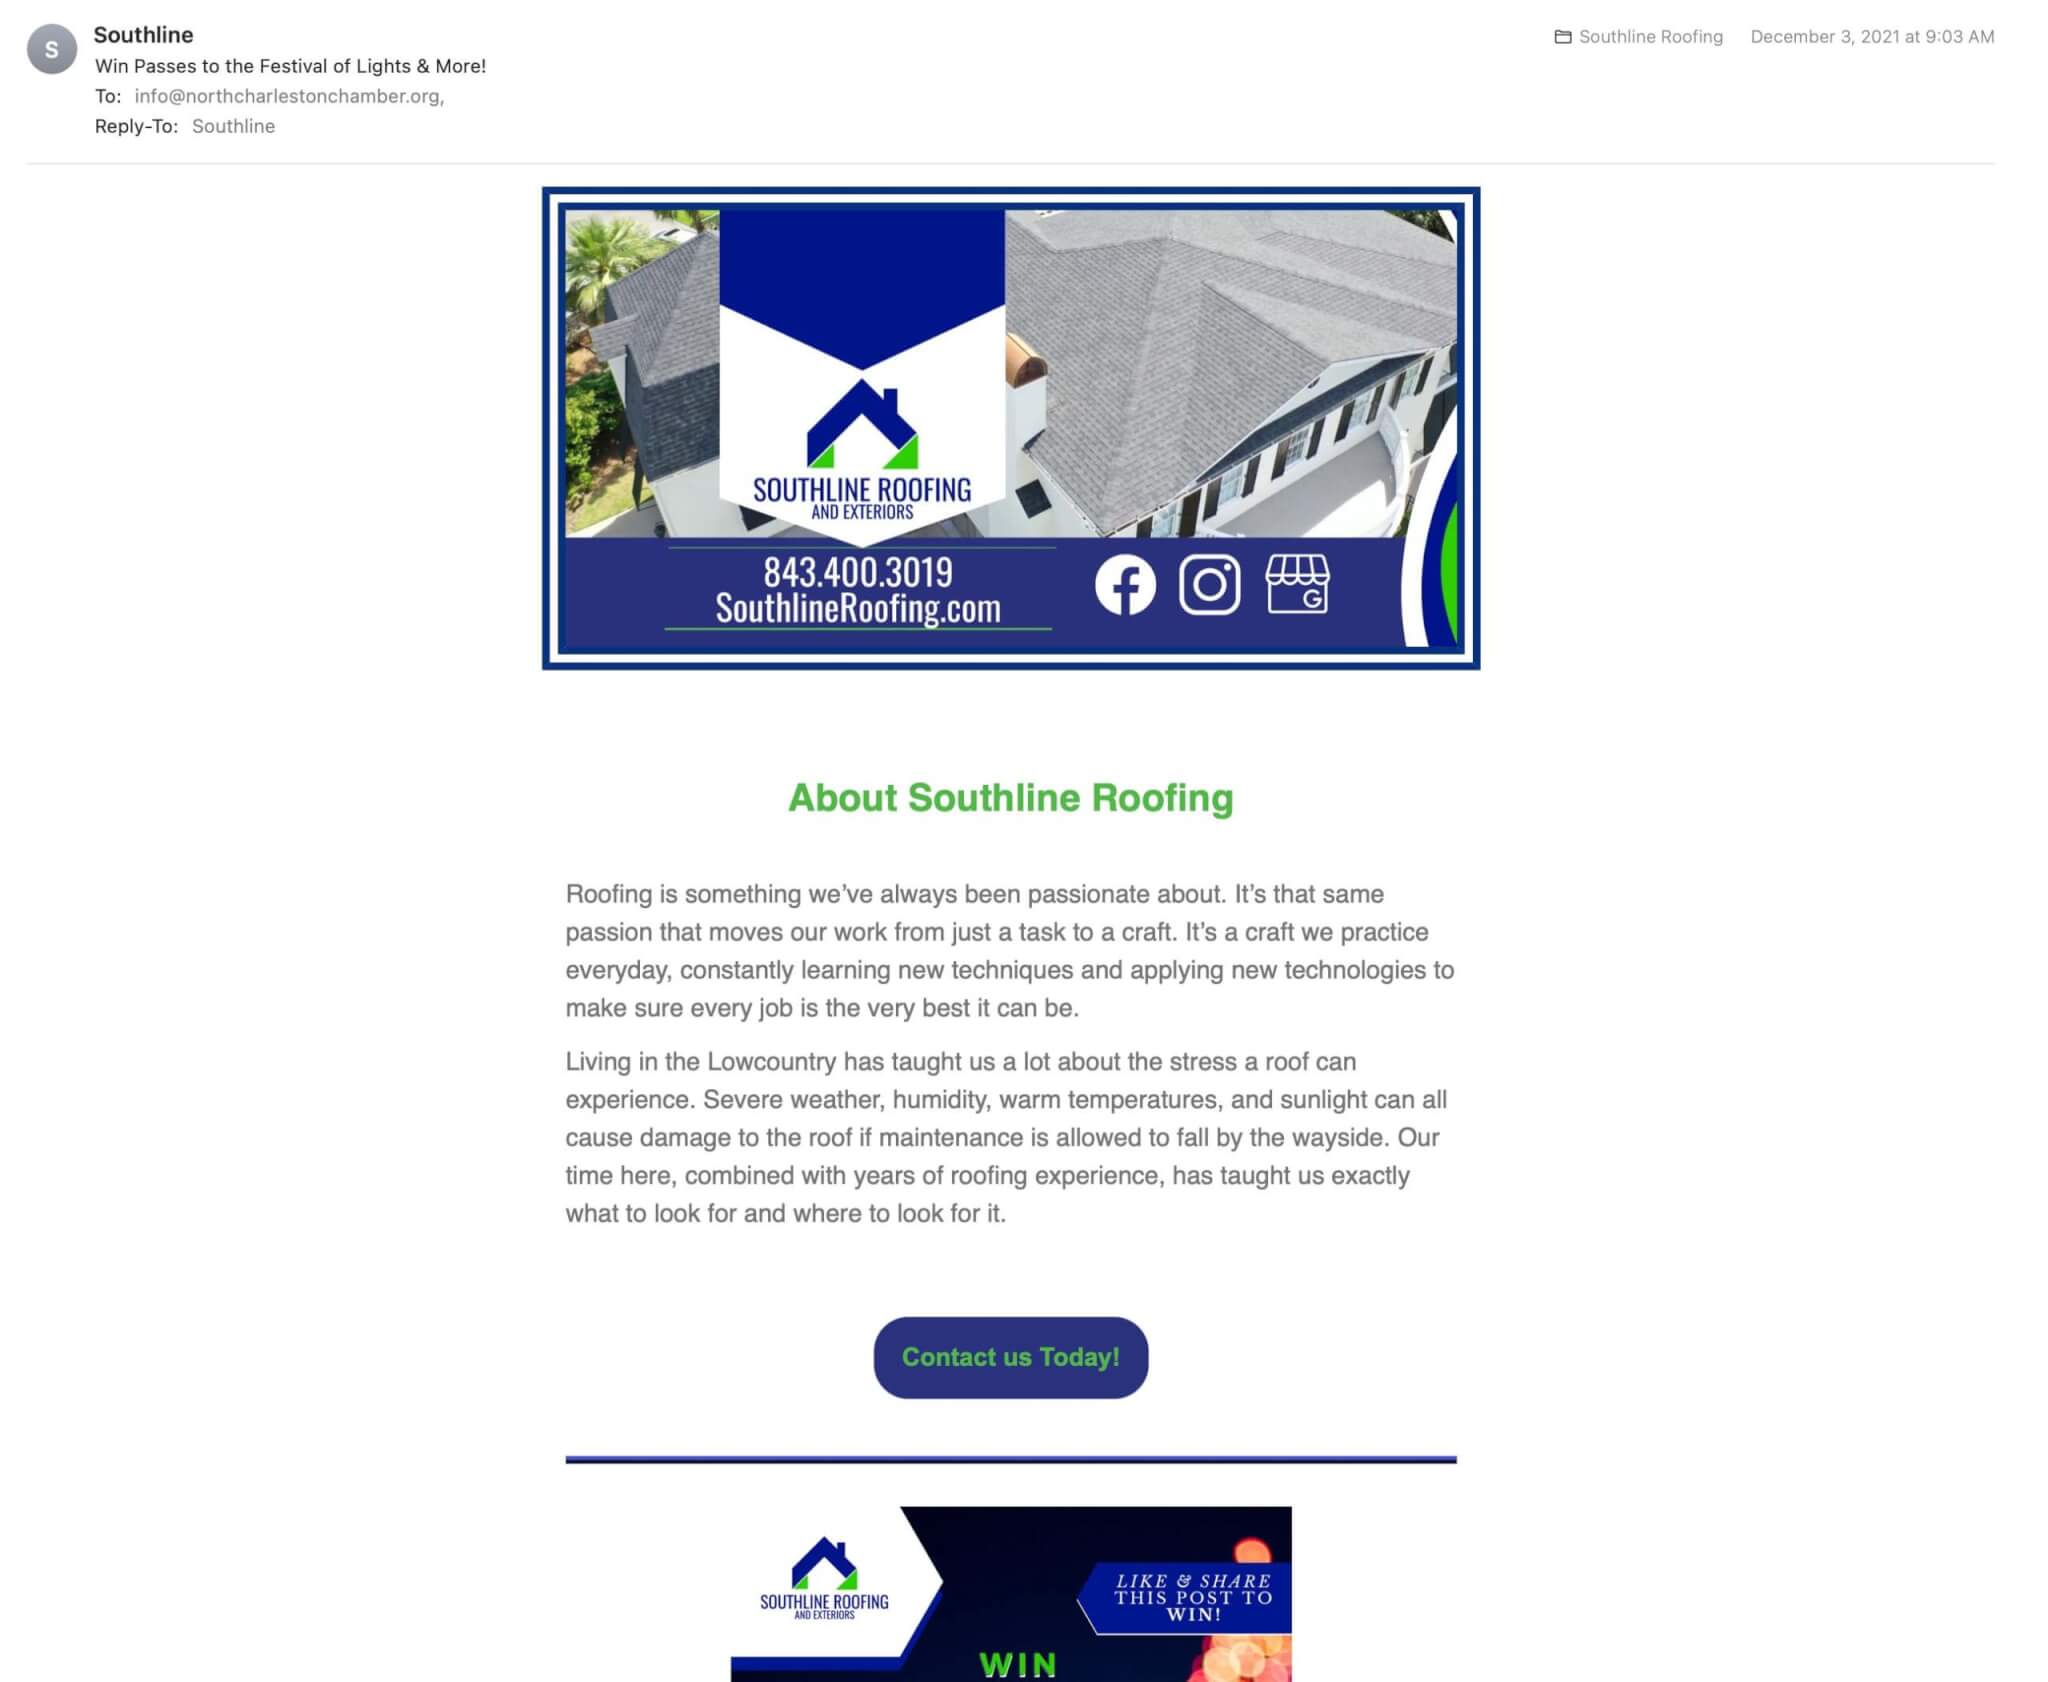 Southline Roofing Newsletter created by Stingray Branding 